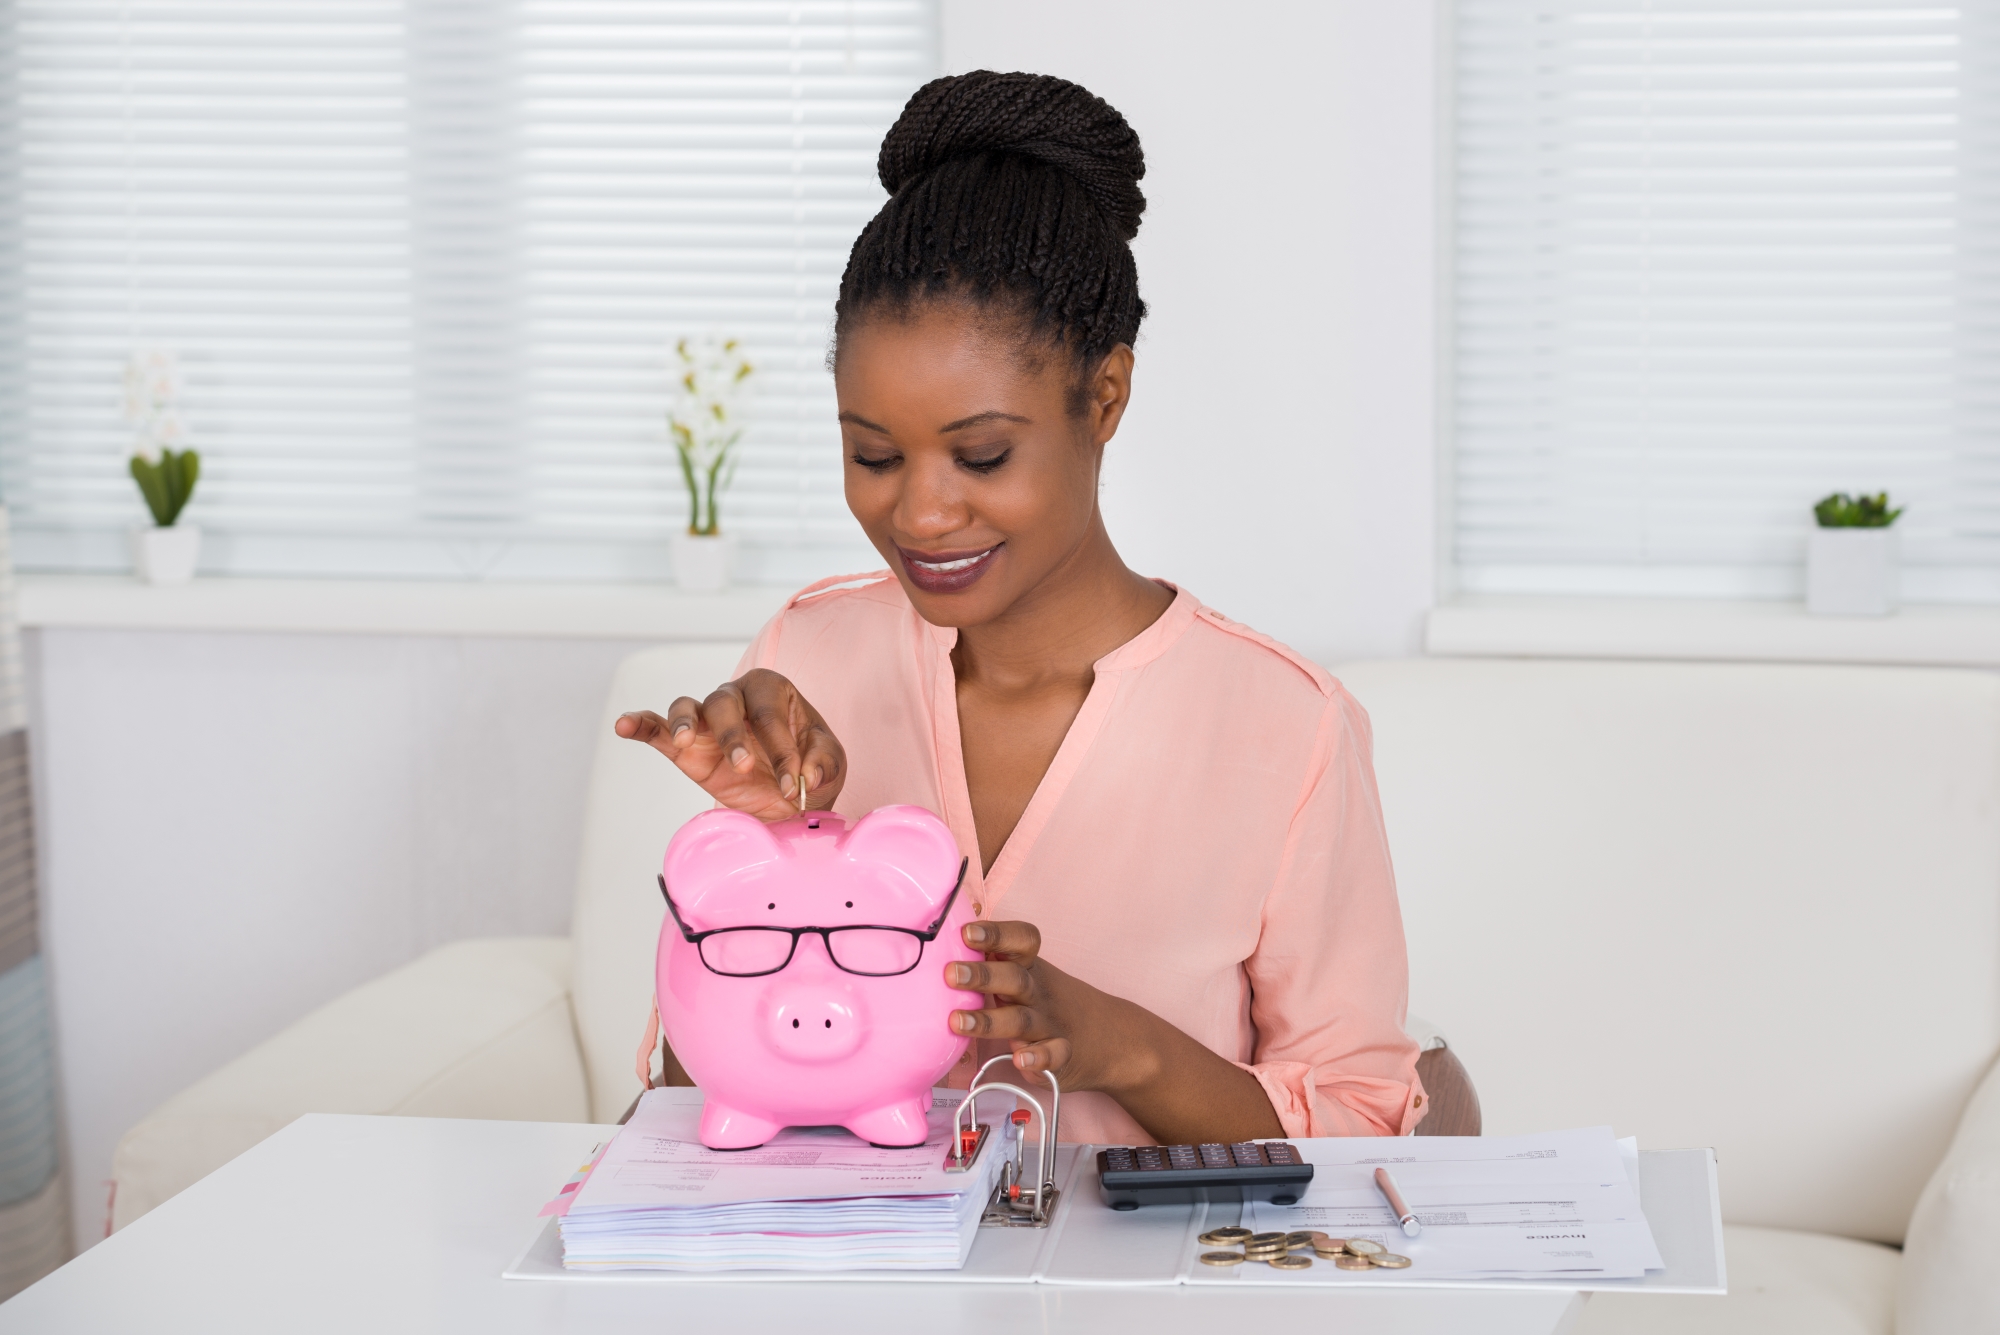 A lady putting money in a piggy bank